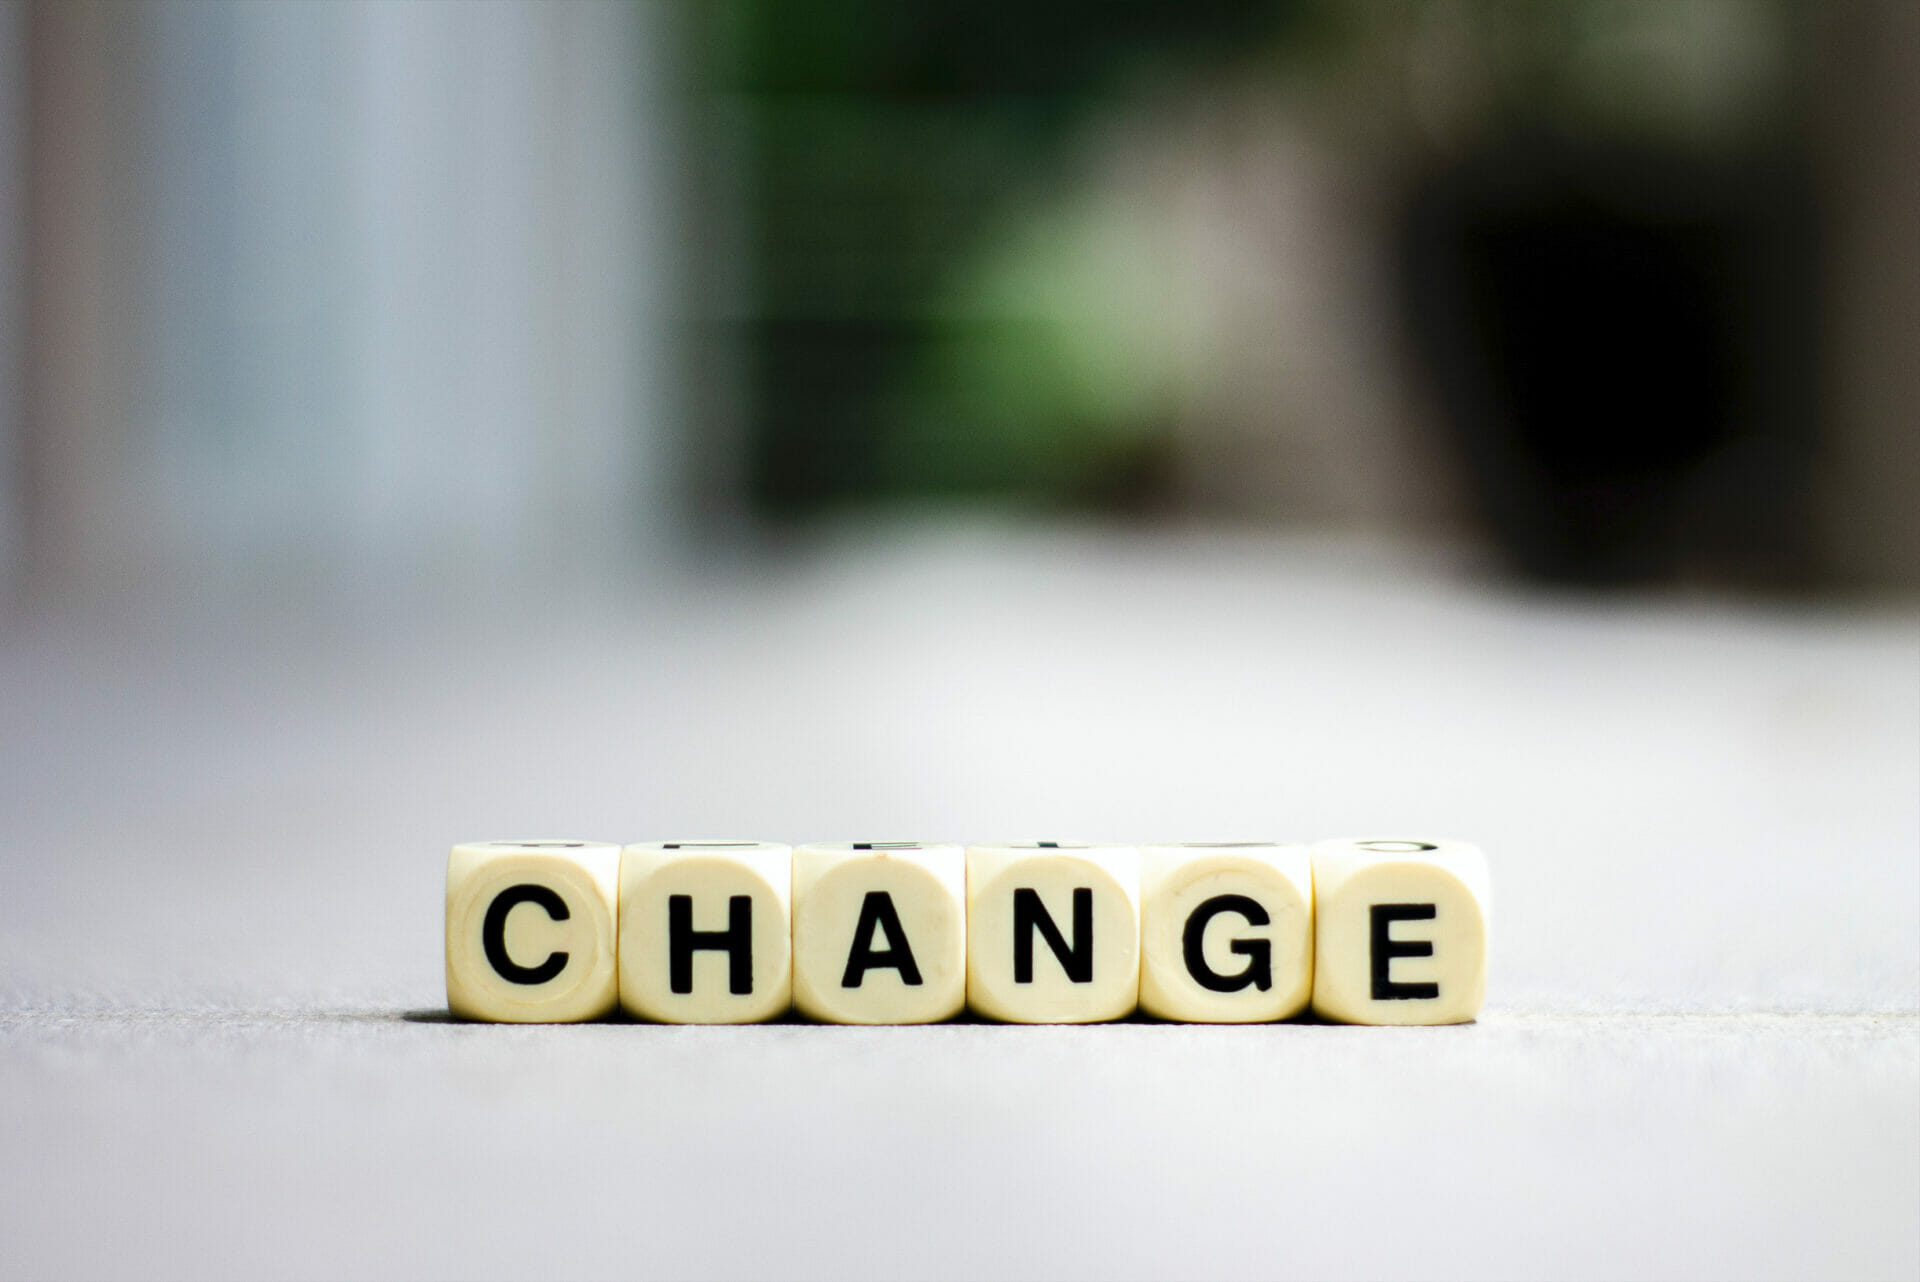 Why Are We So Surprised by Change?